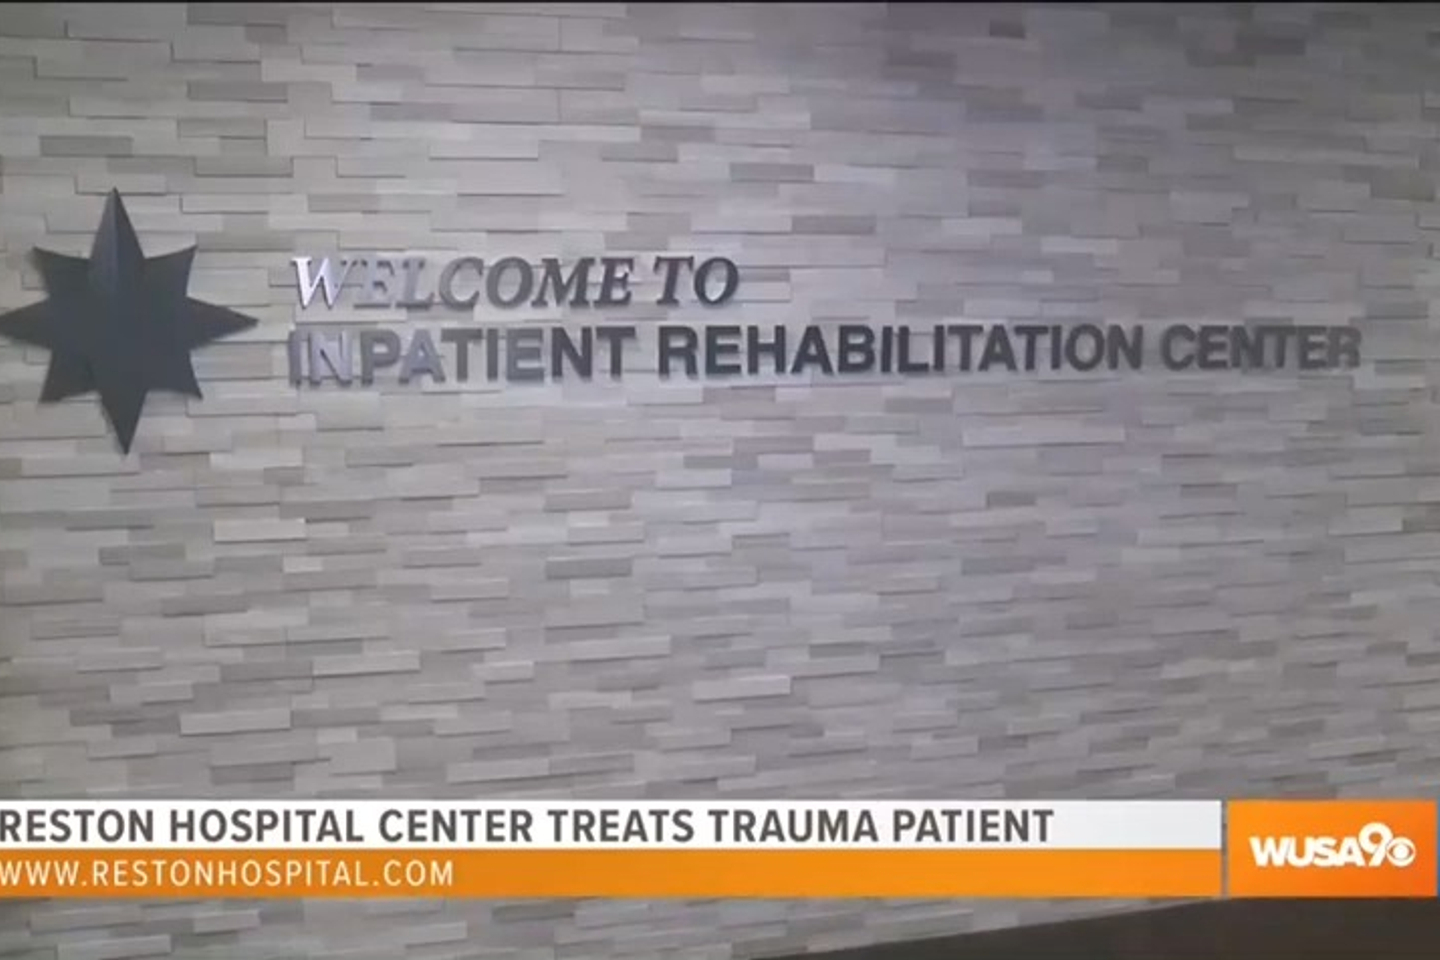 Slate brick wall in a hallway of Reston Hospital Center with a metal sign that reads, "Welcome to Inpatient Rehabilitation Center." There is a news tagline at the bottom of the photo that reads, "Reston Hospital Center treats trauma patient."